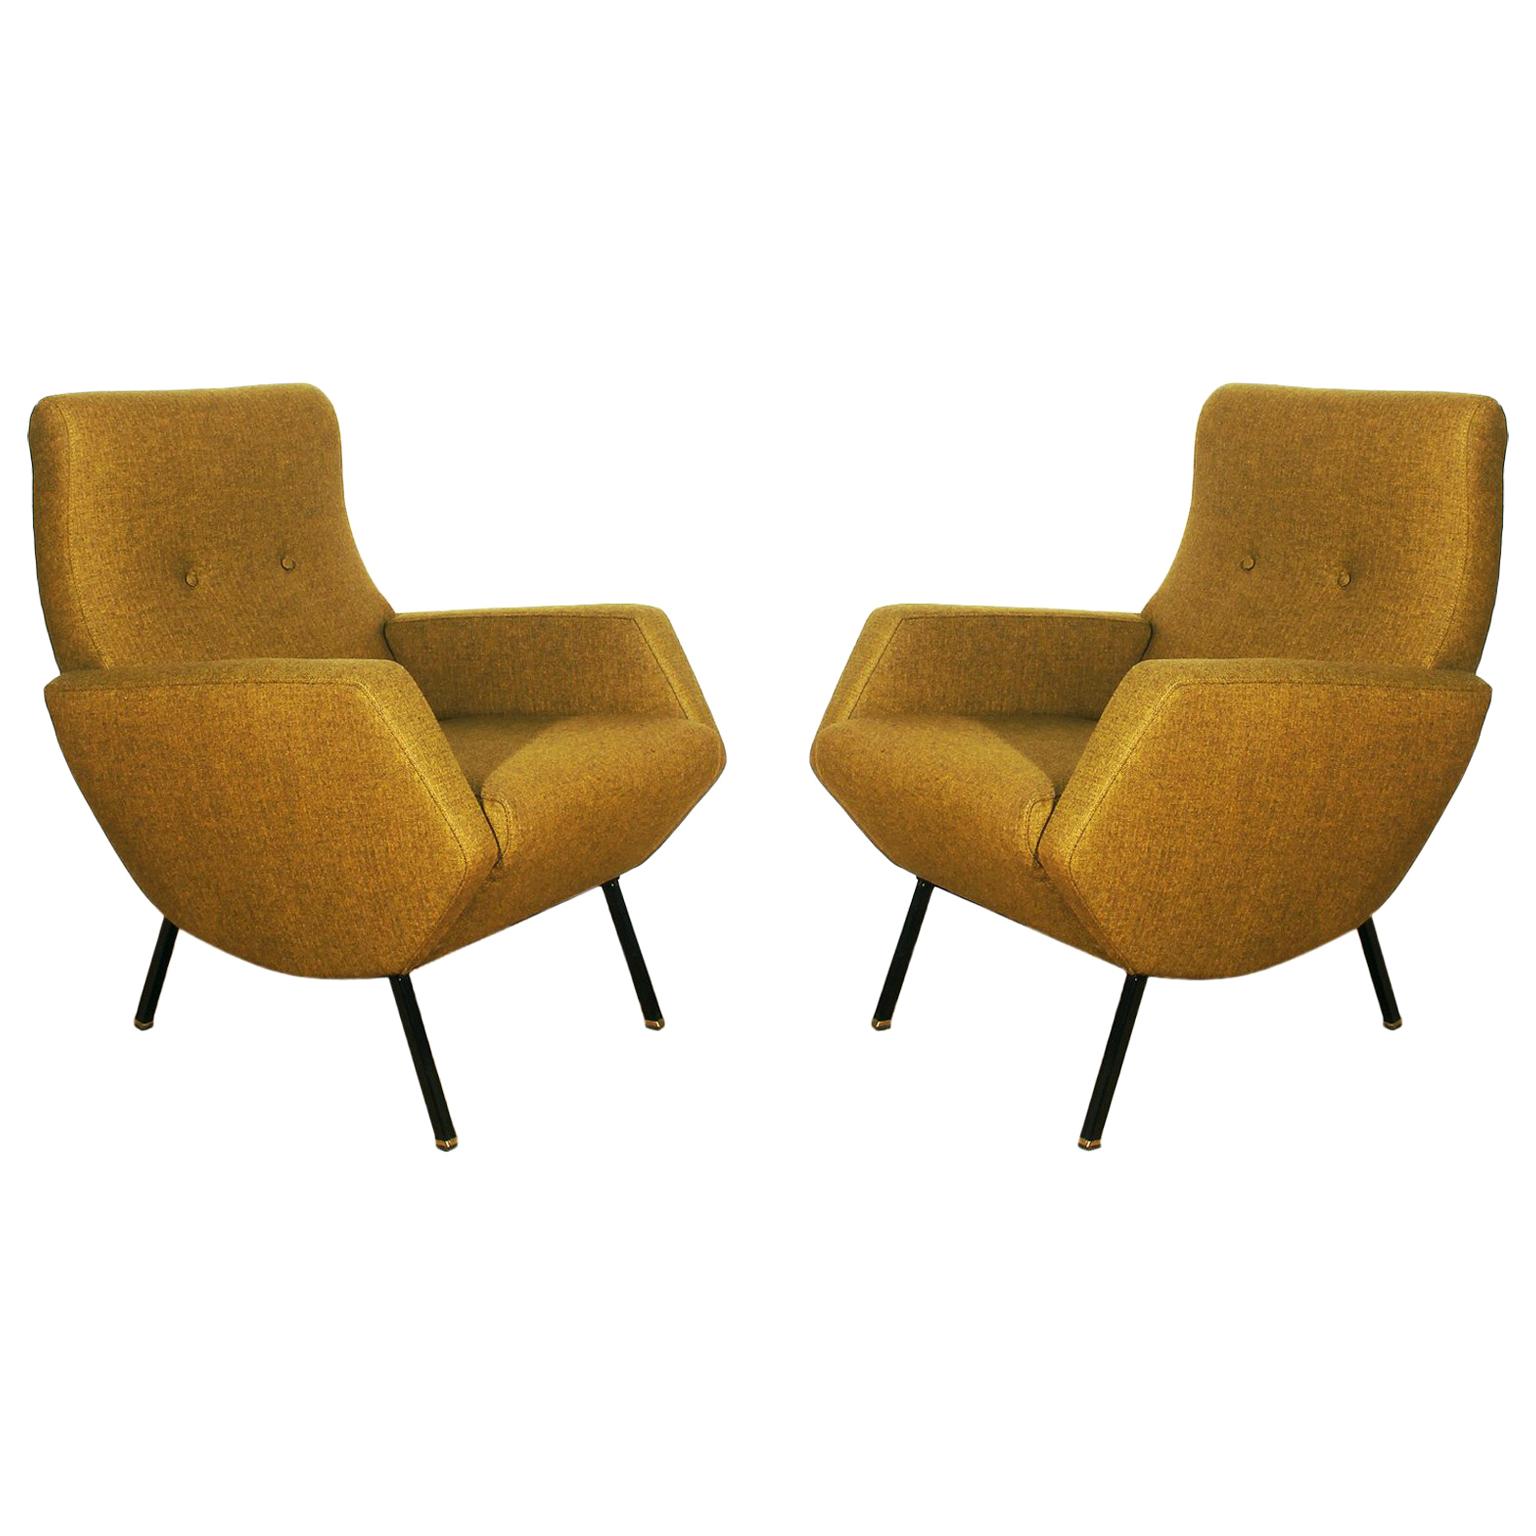 1960s Pair of Armchairs, Wrought Iron, Brass, Mottled Yellow Fabric, Italy